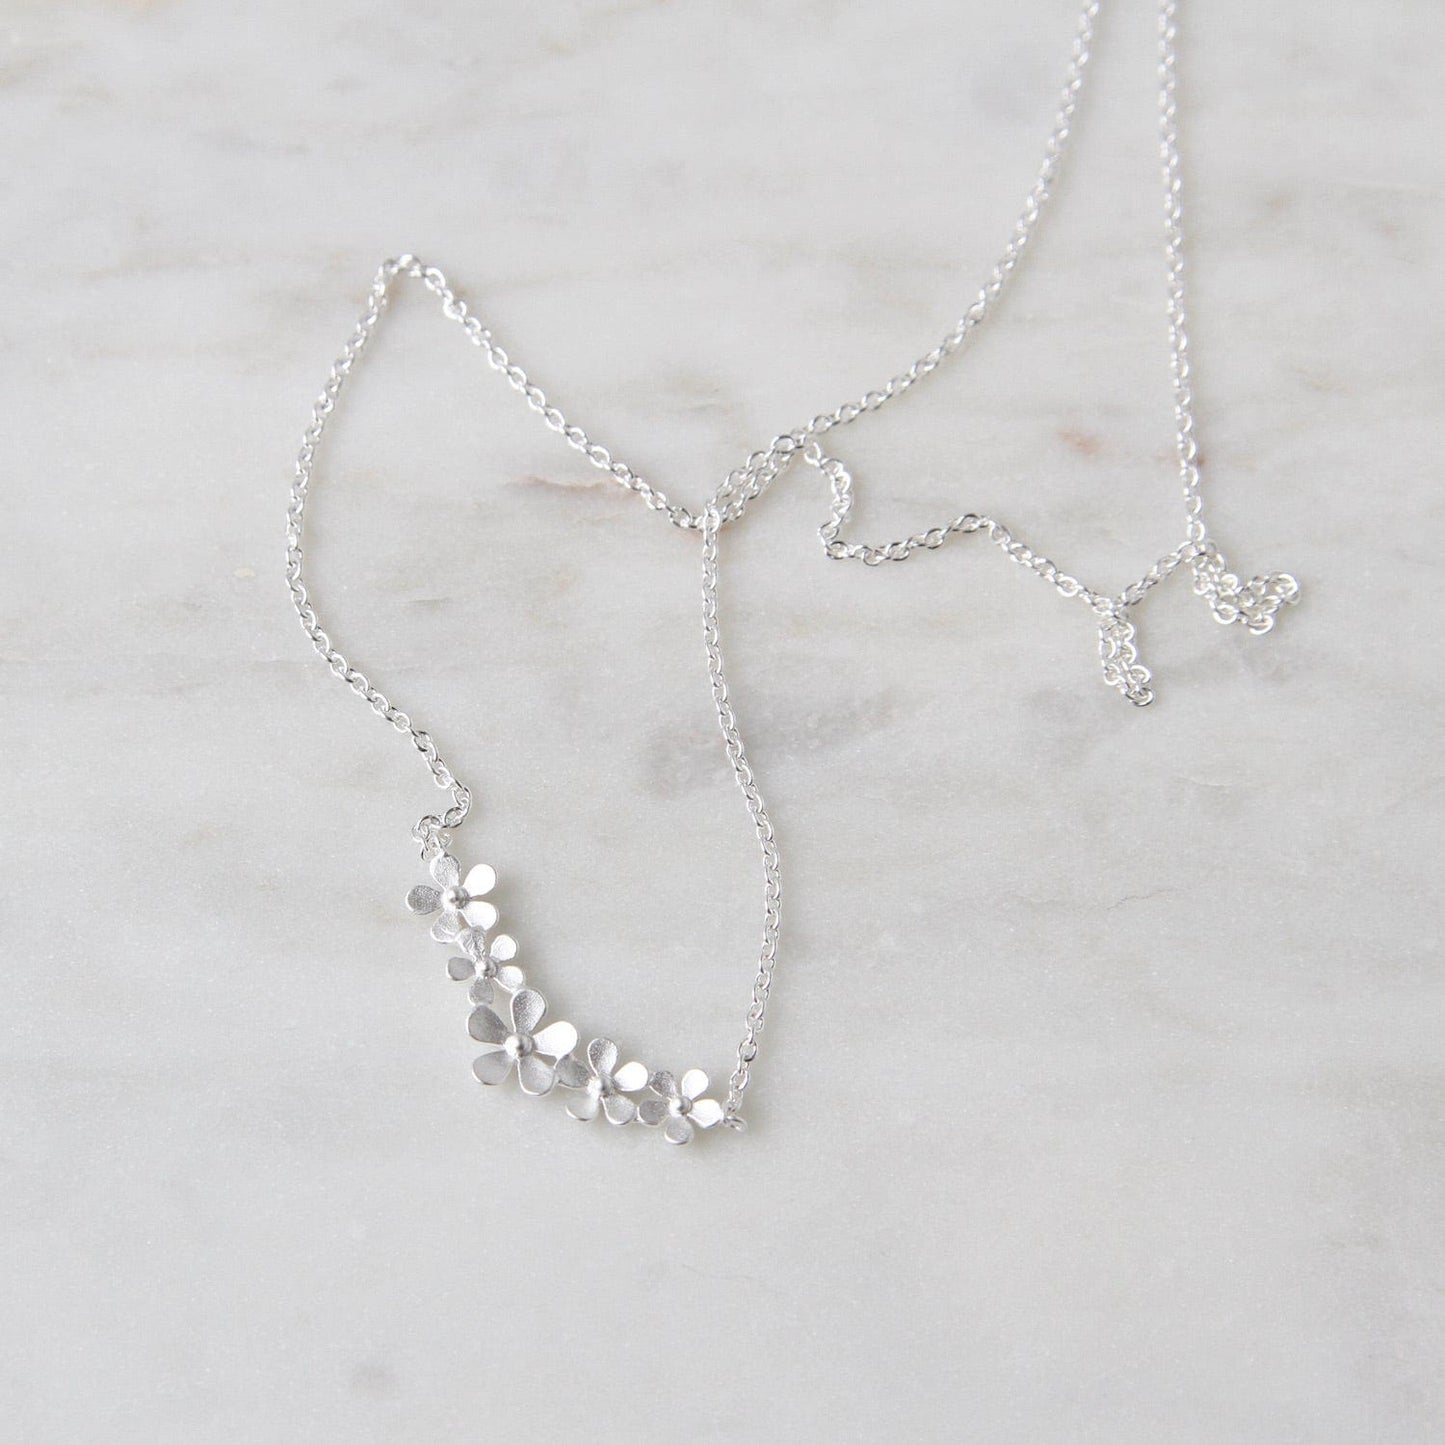 NKL Sterling Silver Curve of Forget-me-nots Necklace